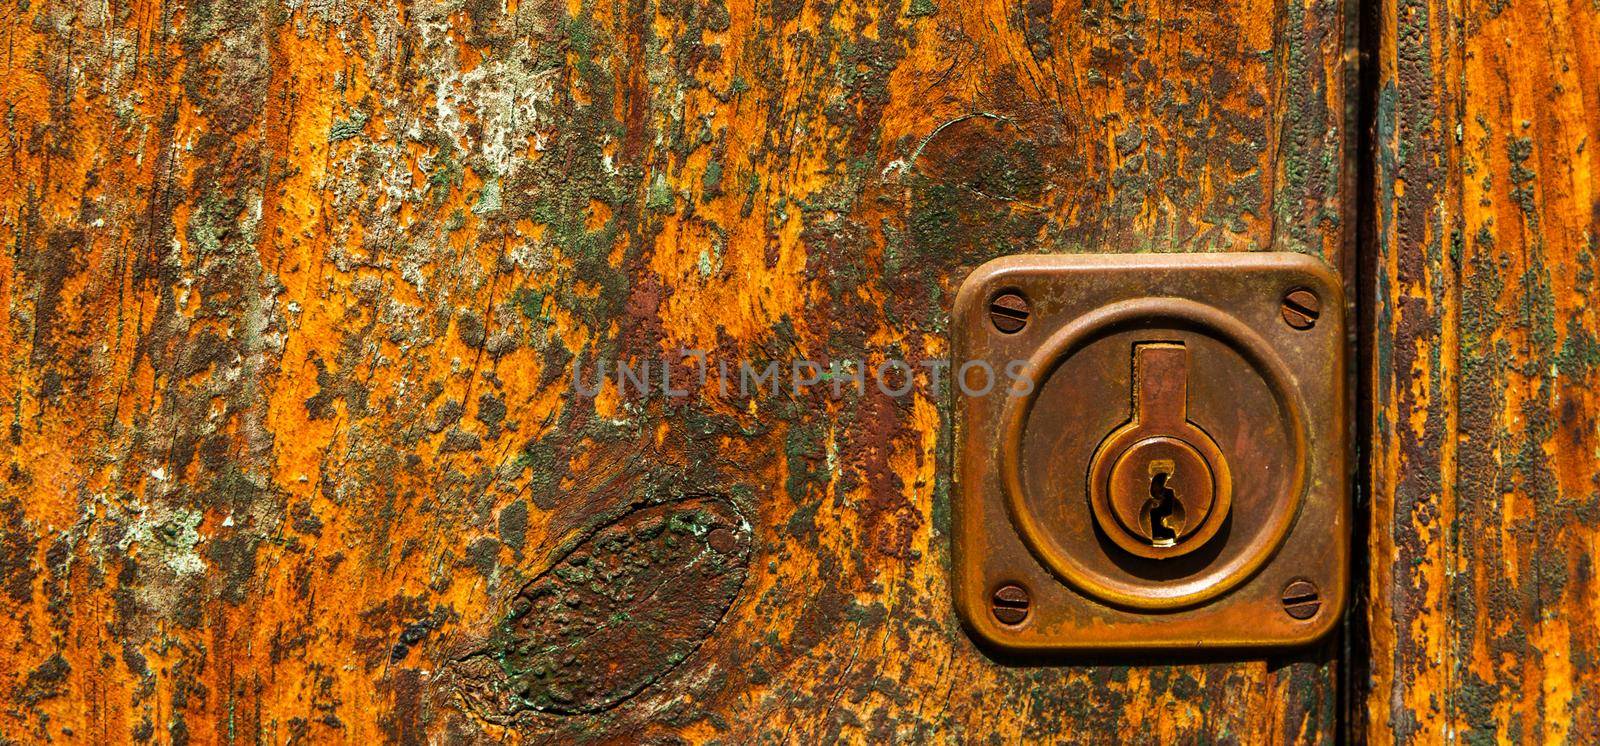 close up on the old lock with an interesting texture on the door, home security, vintage